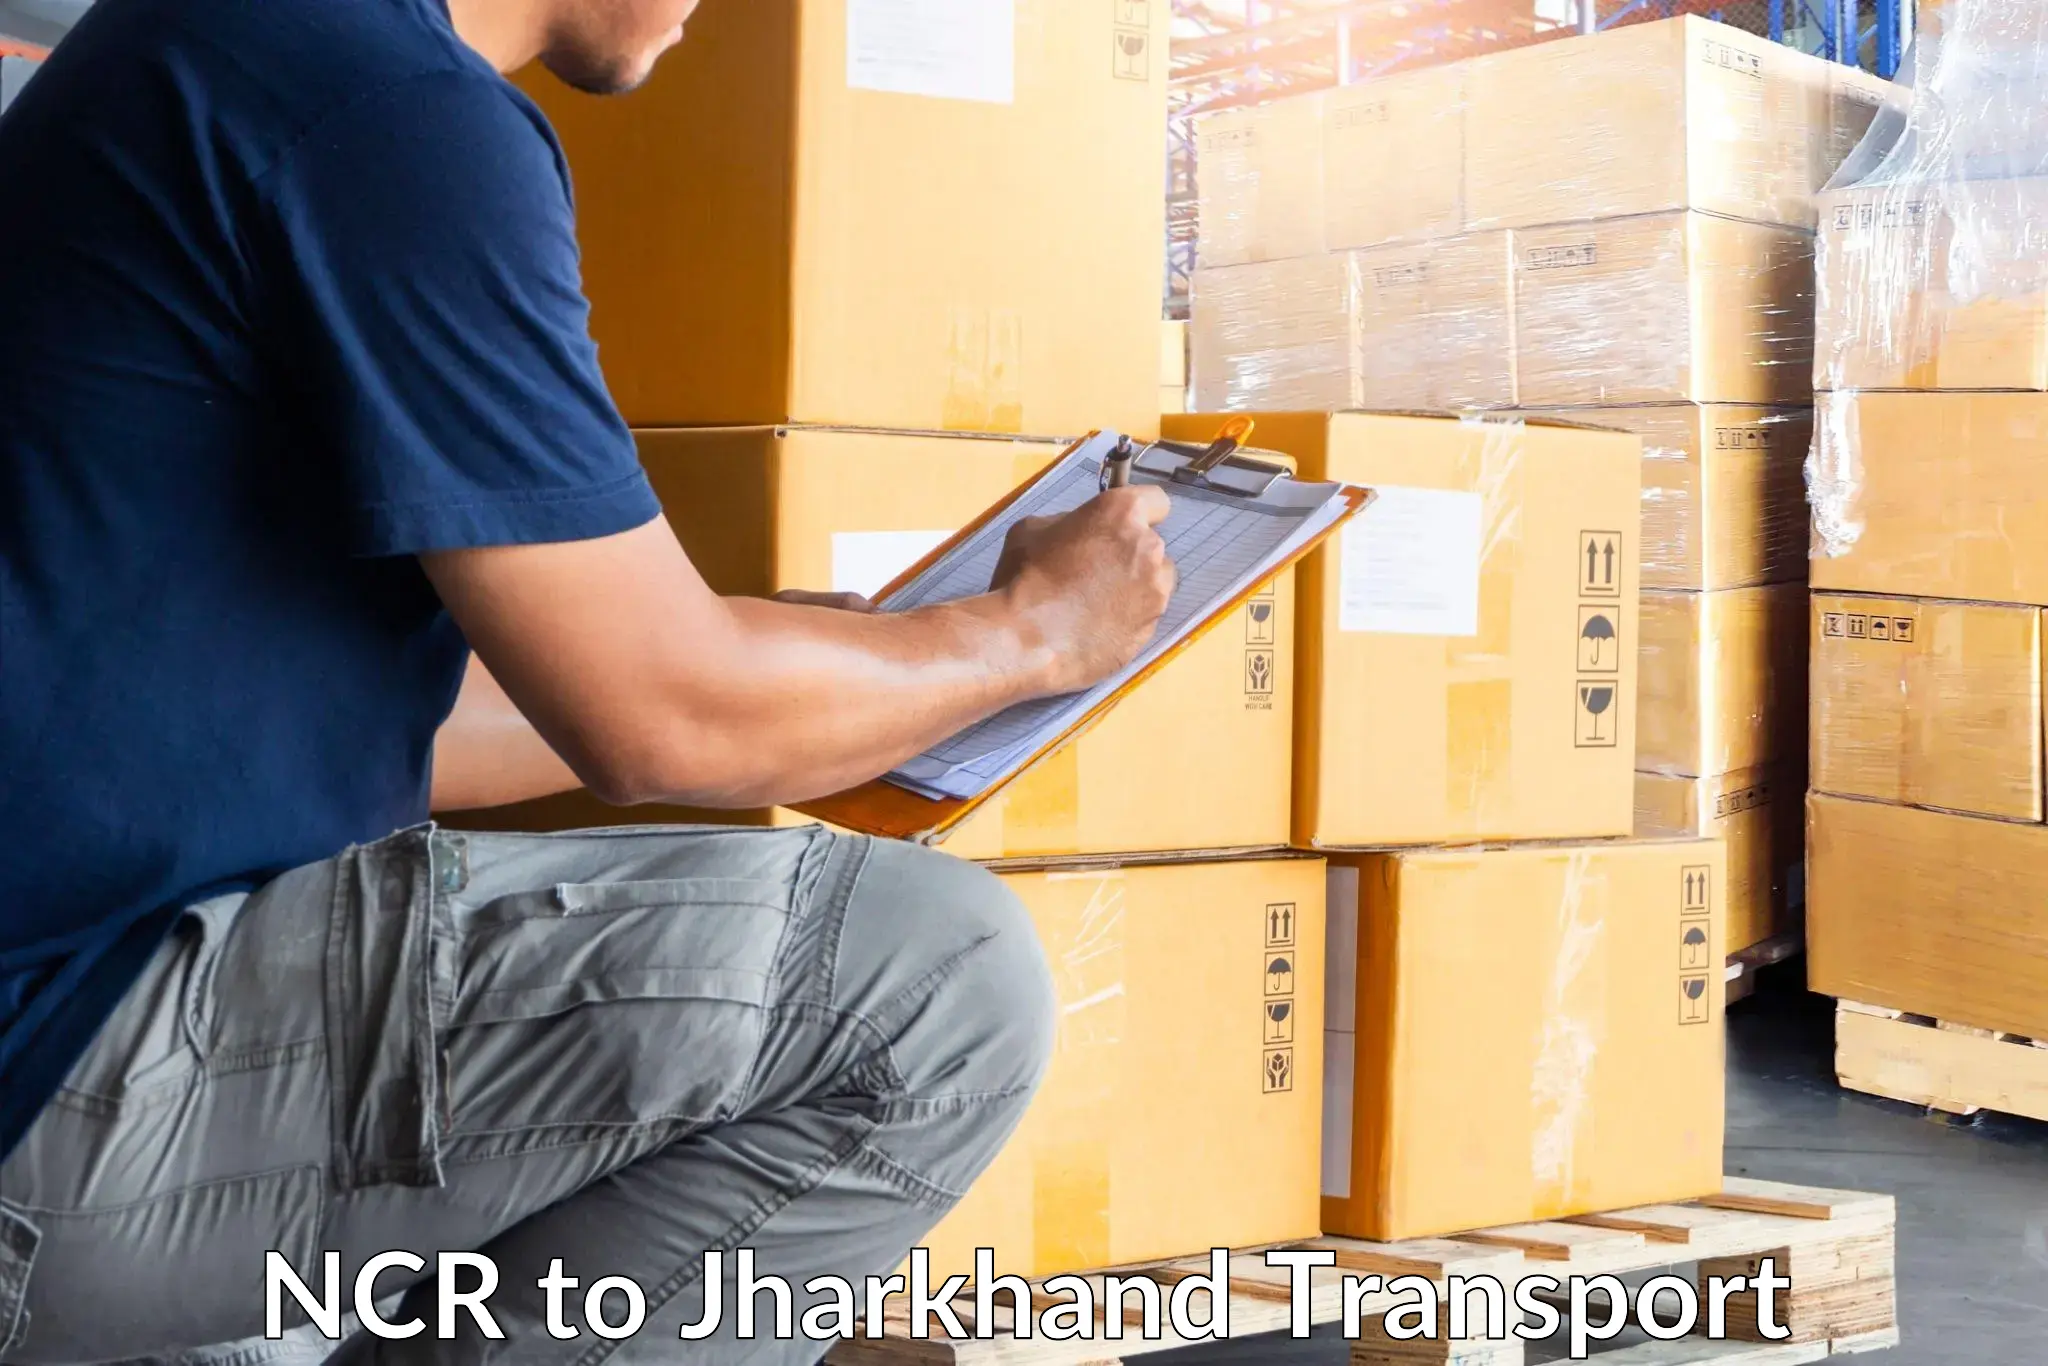 Container transport service NCR to Rajmahal